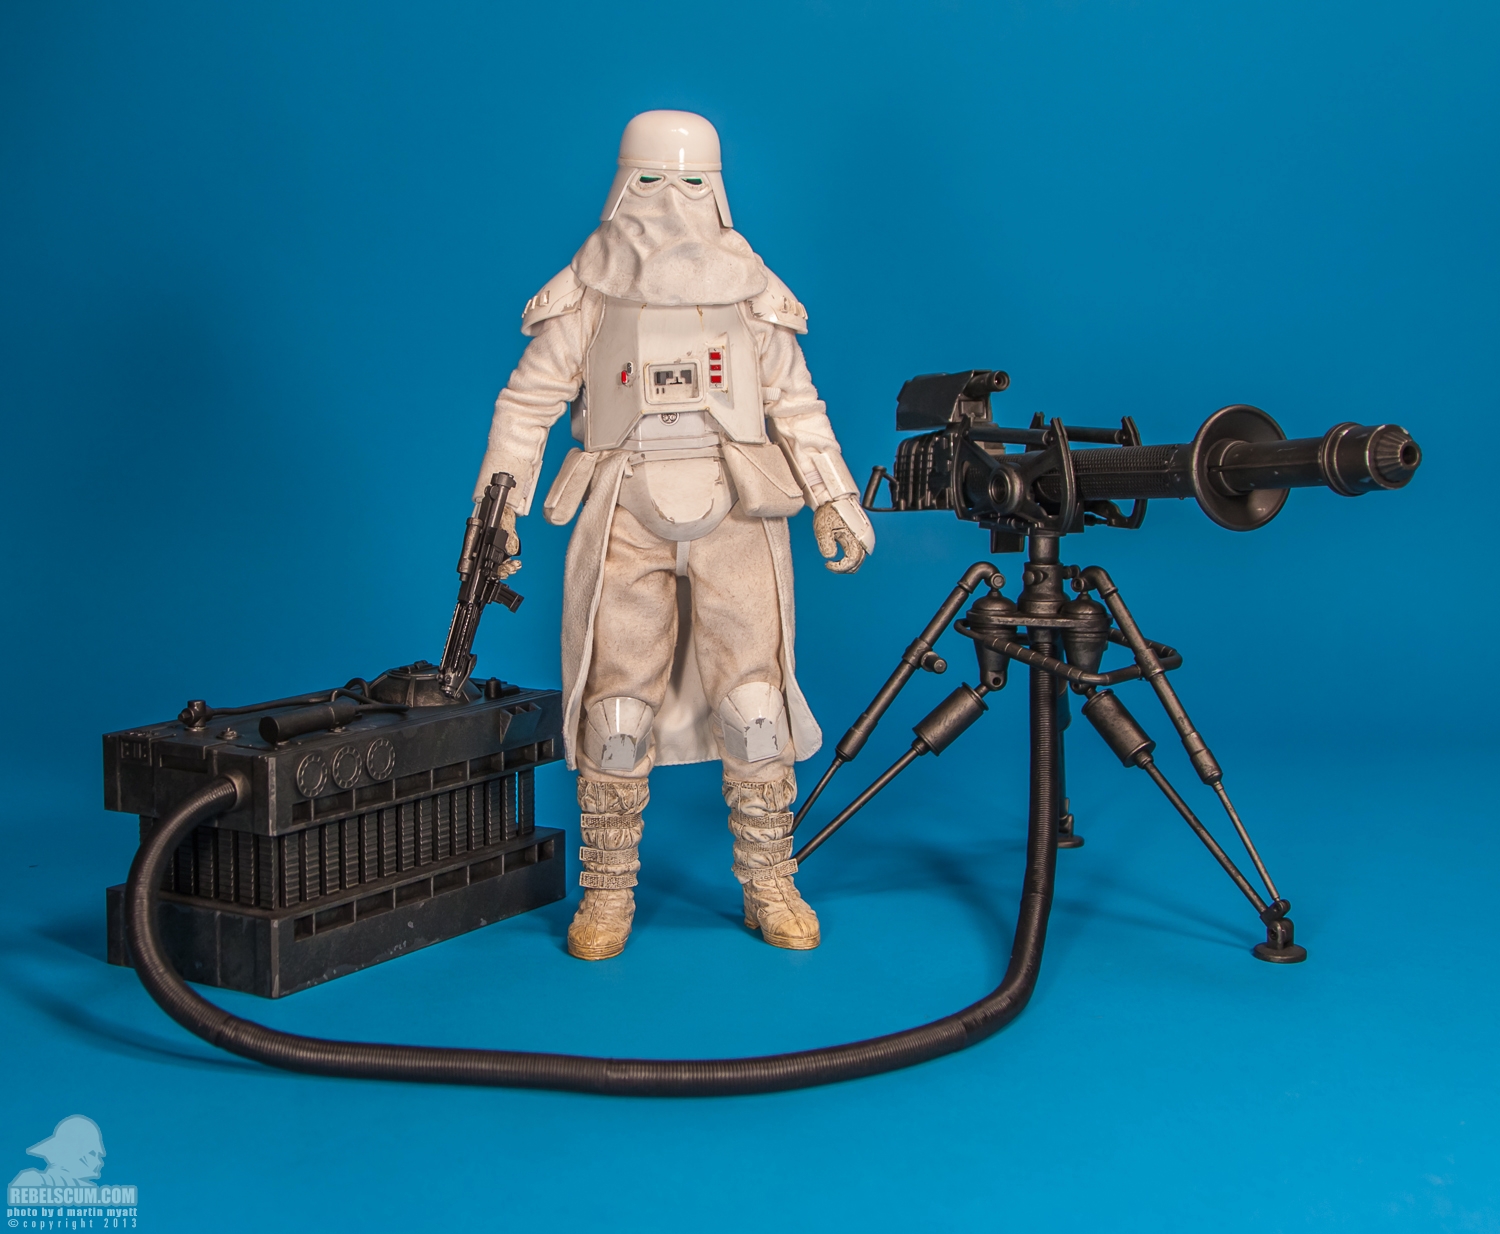 Snowtrooper_Militaries_Of_Star_Wars_Sideshow_Collectibles-18.jpg